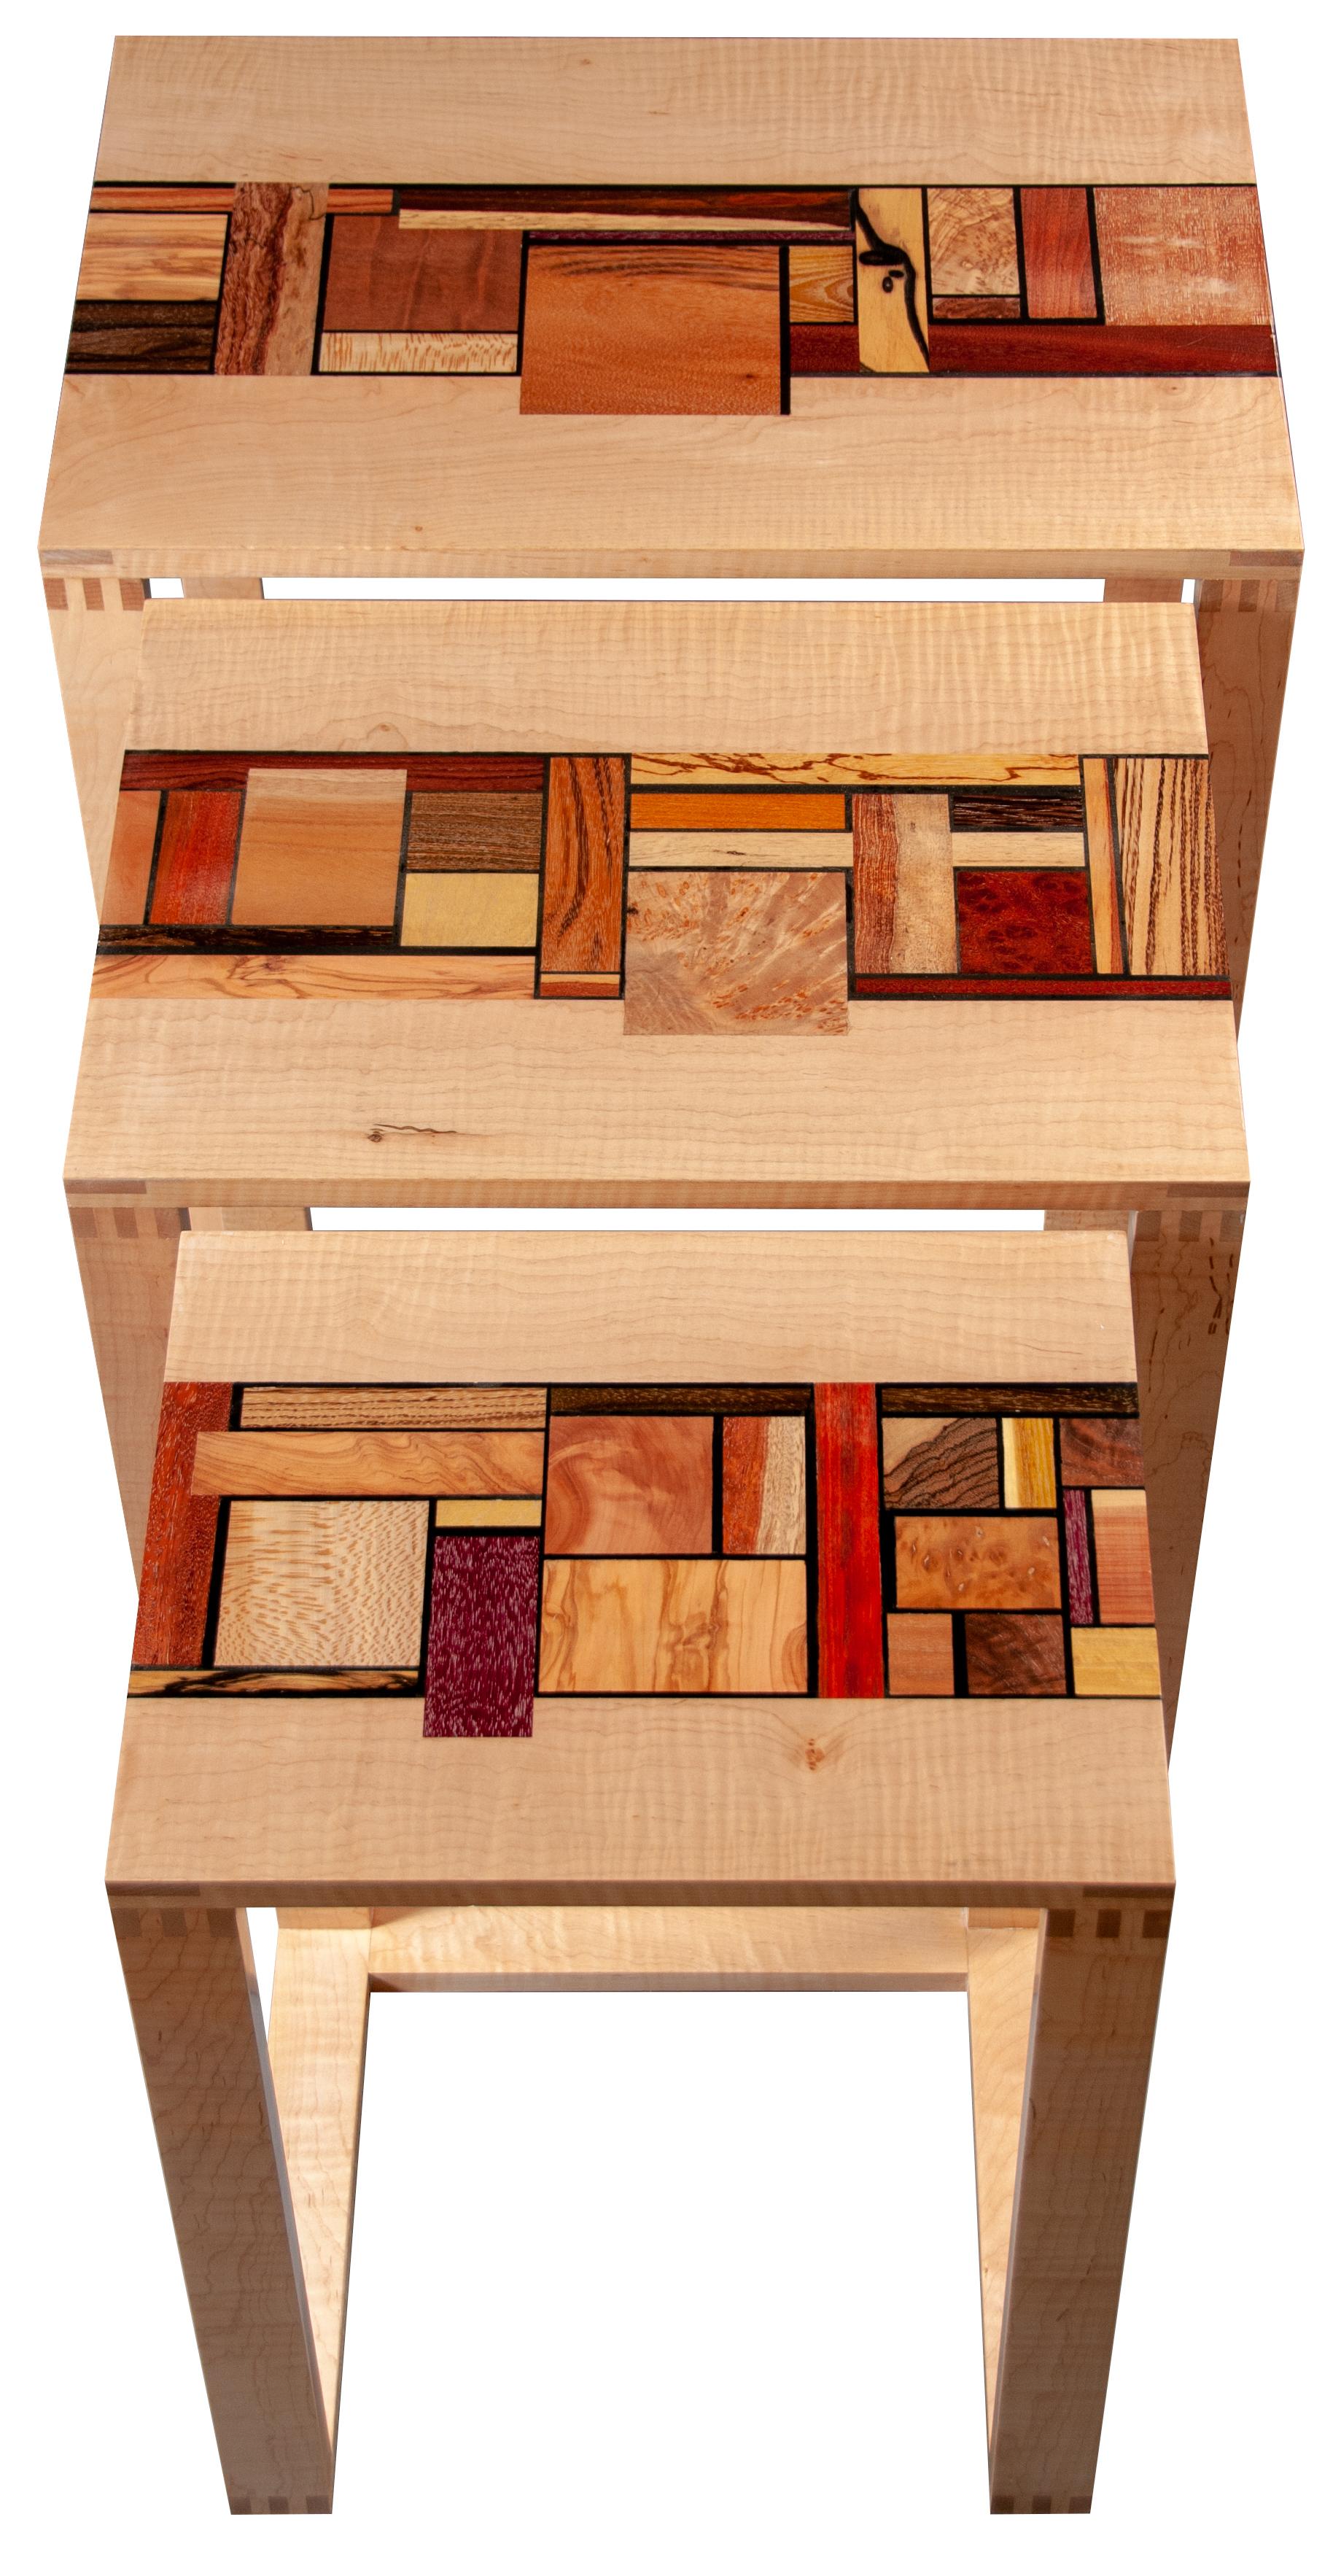 Title: “De Stijl Mondrian’s Work” 

Year work was completed: 2016

Form: Nested tables

Materials: Table frame, Tiger Maple; Mosaic pieces 50 different species and figures of wood from over 18 countries: American Black Walnut plain, mottled,